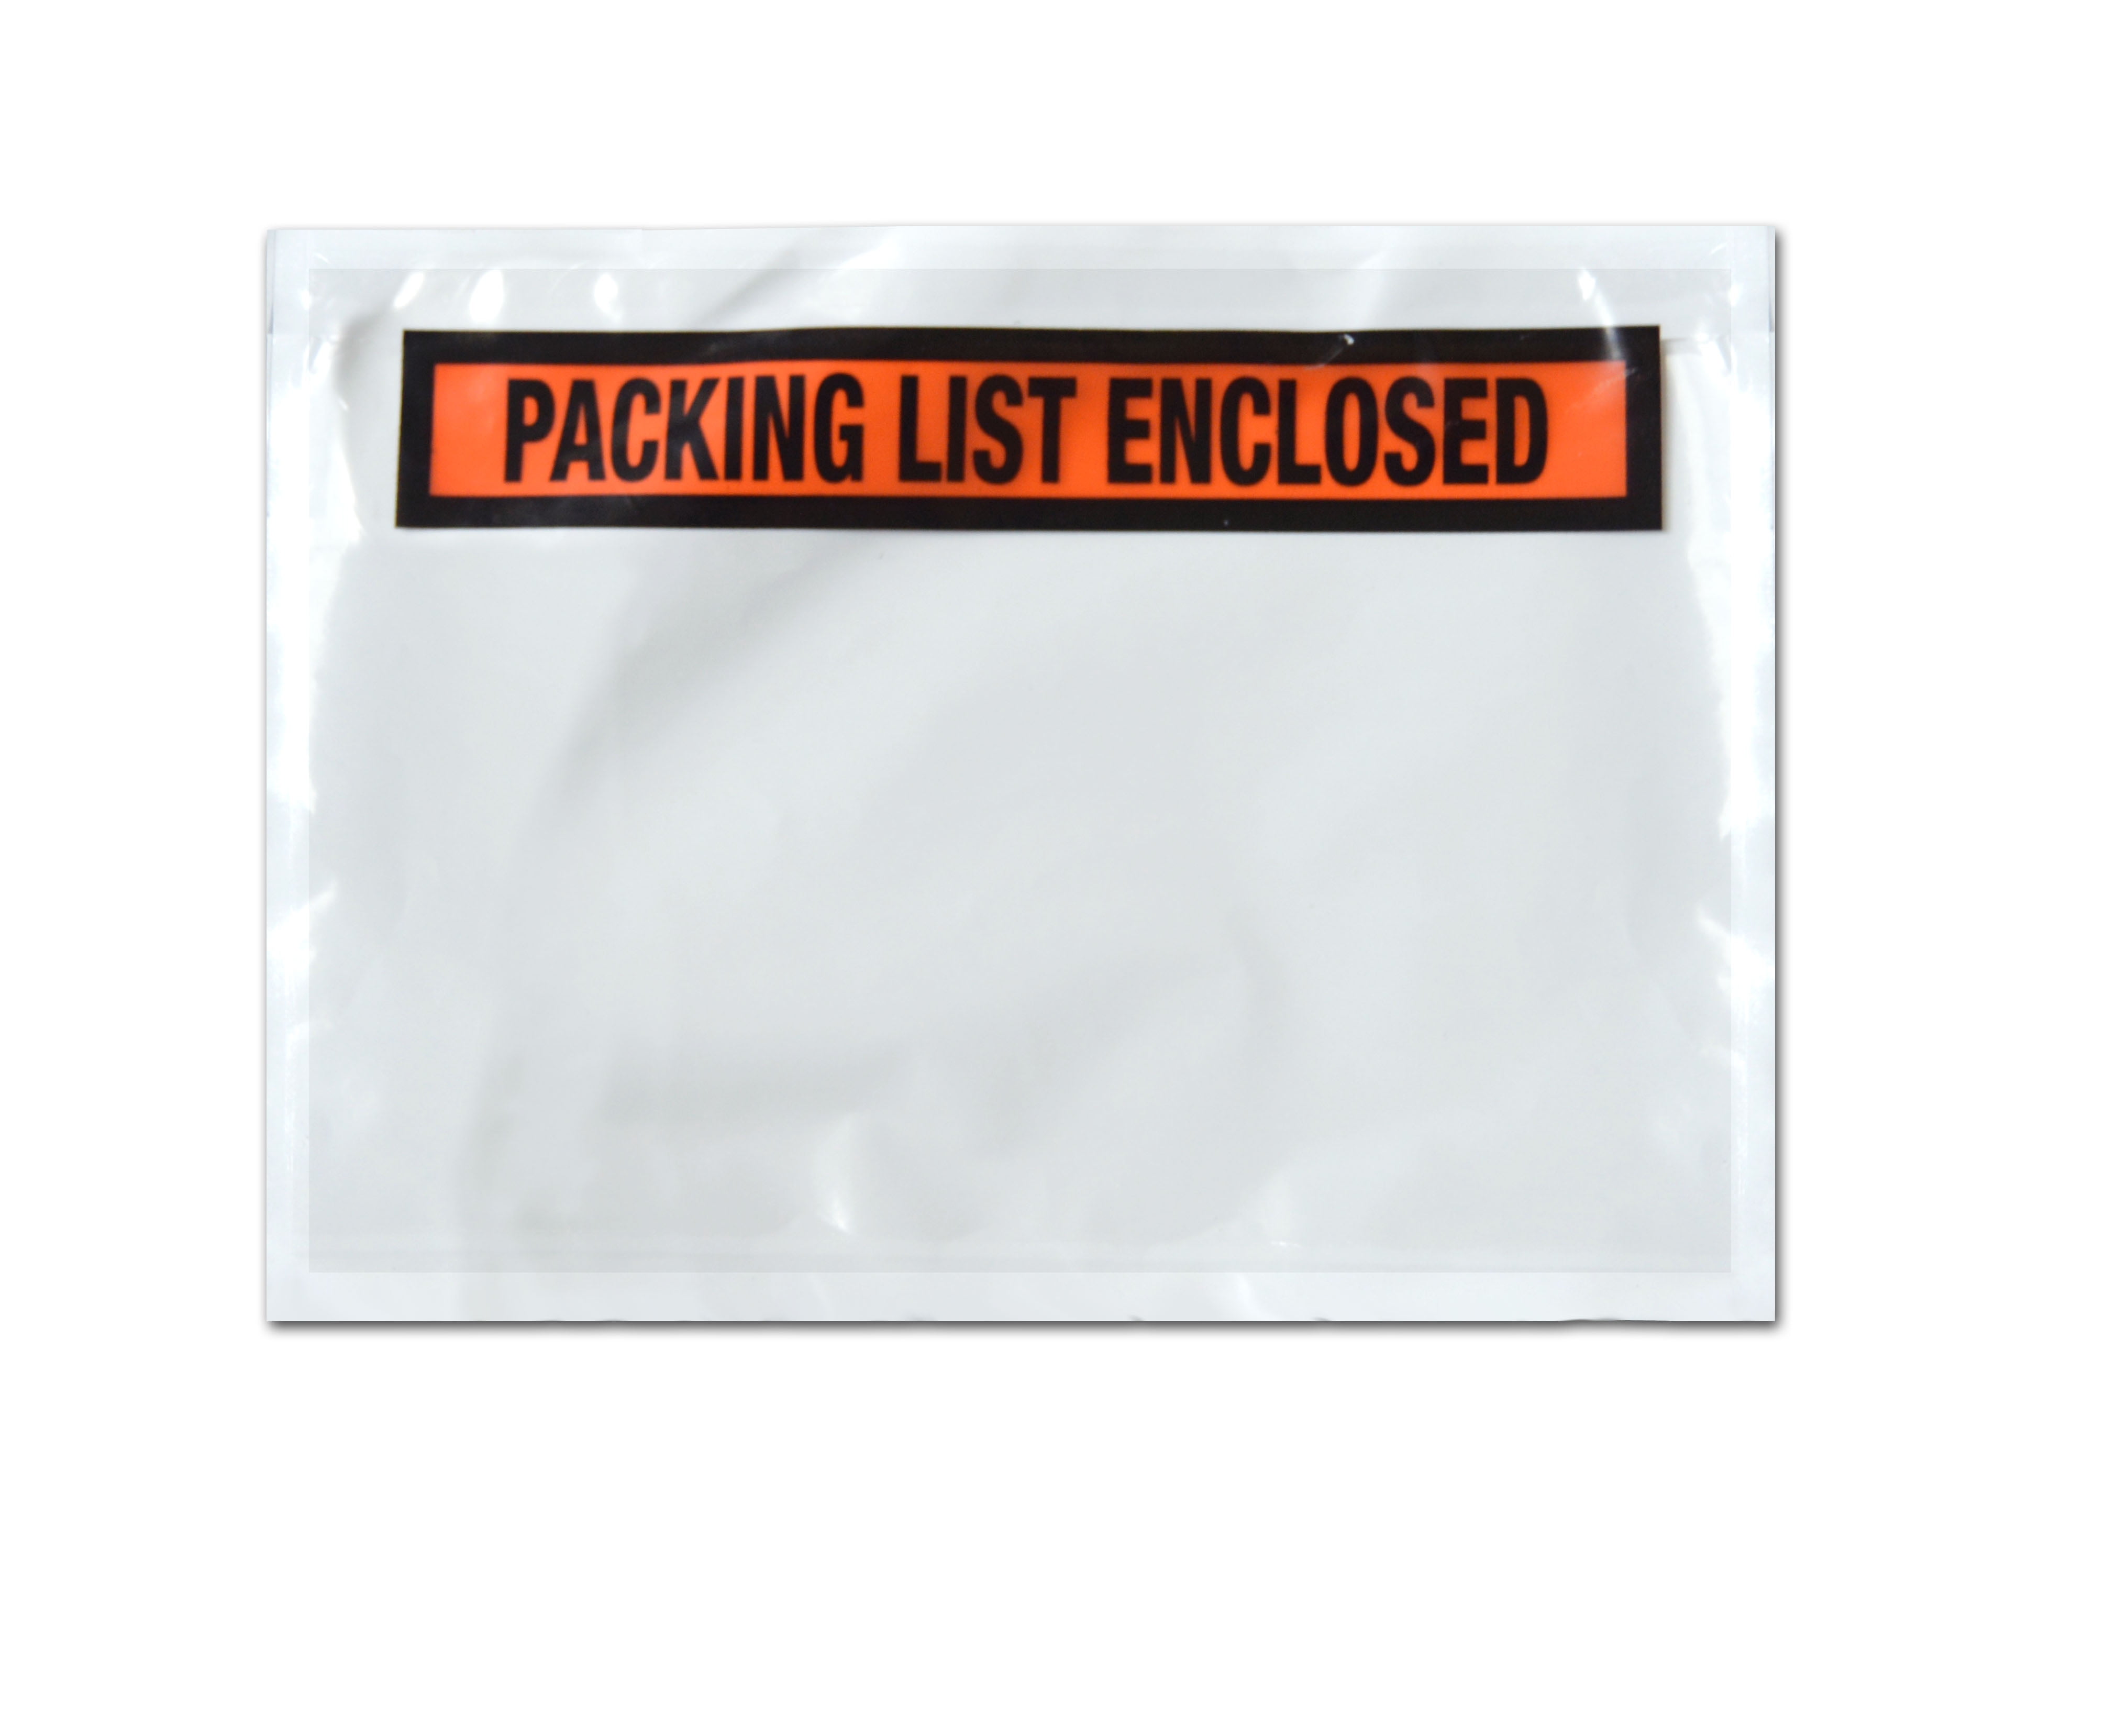 100 Packing List Enclosed Panel Face Envelopes 7.5 x 5.5 Shipping Envelope Pouch 